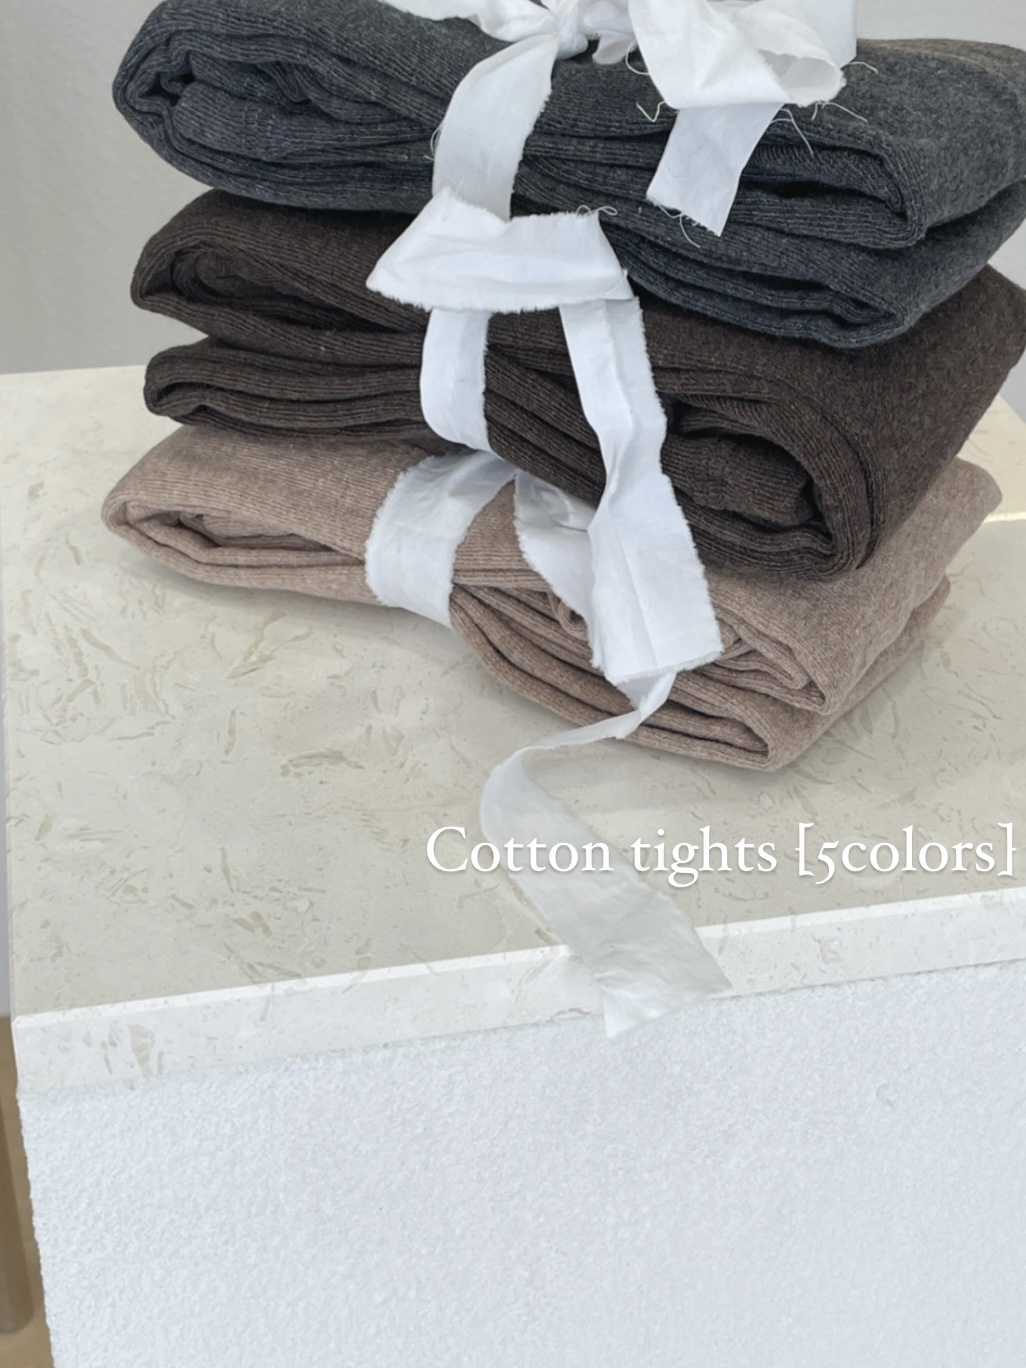 Cotton tights [5colors]